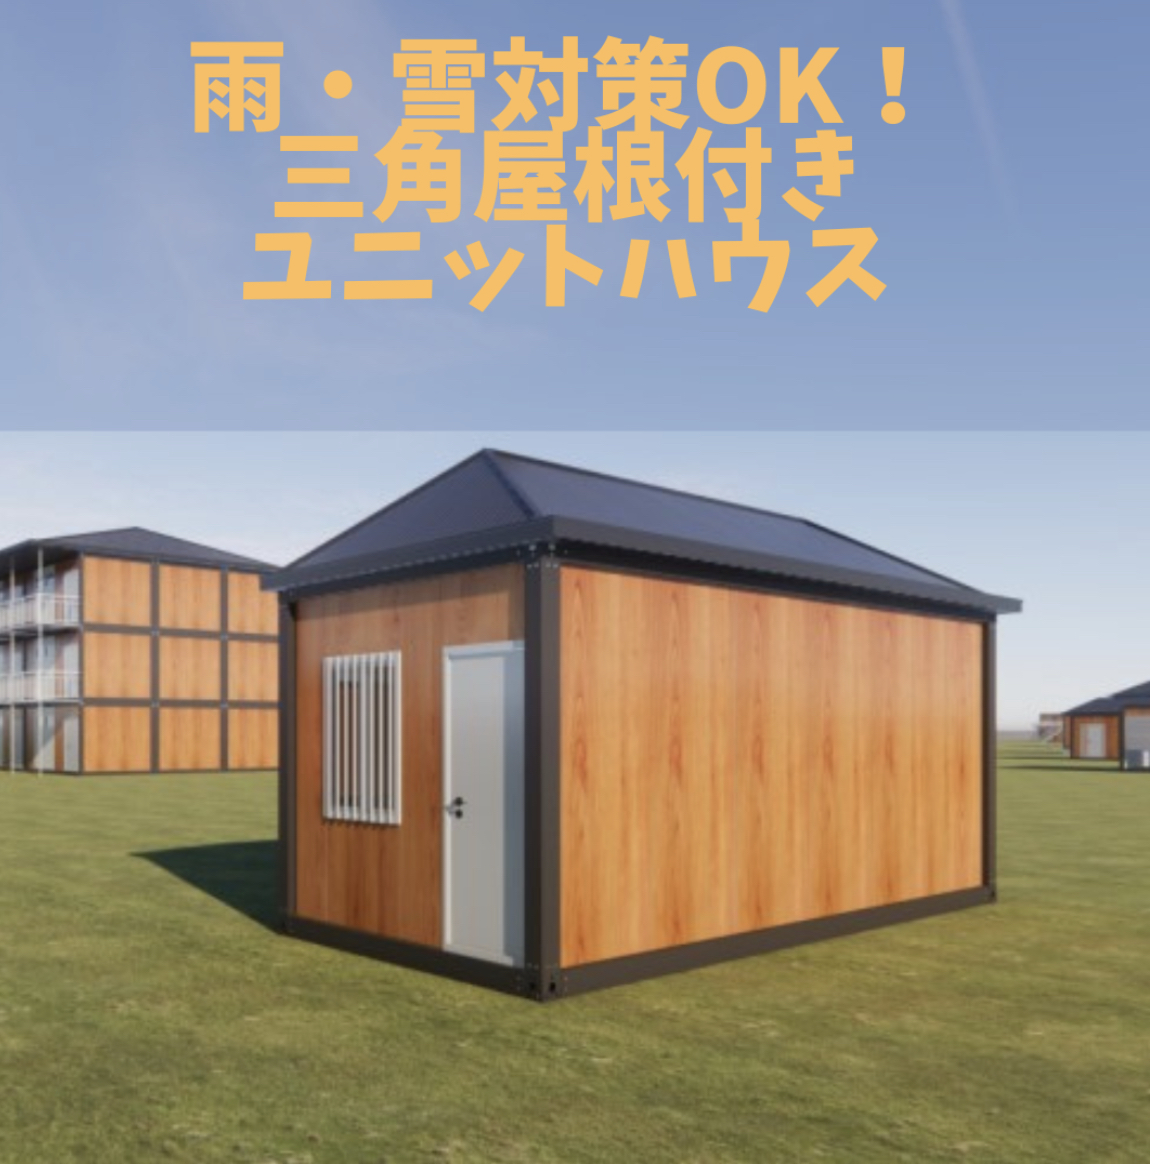  triangle roof . design characteristic * rain snow and ice control also! blue mi. construction type unit house prefab house container temporary super house storage room office work place 